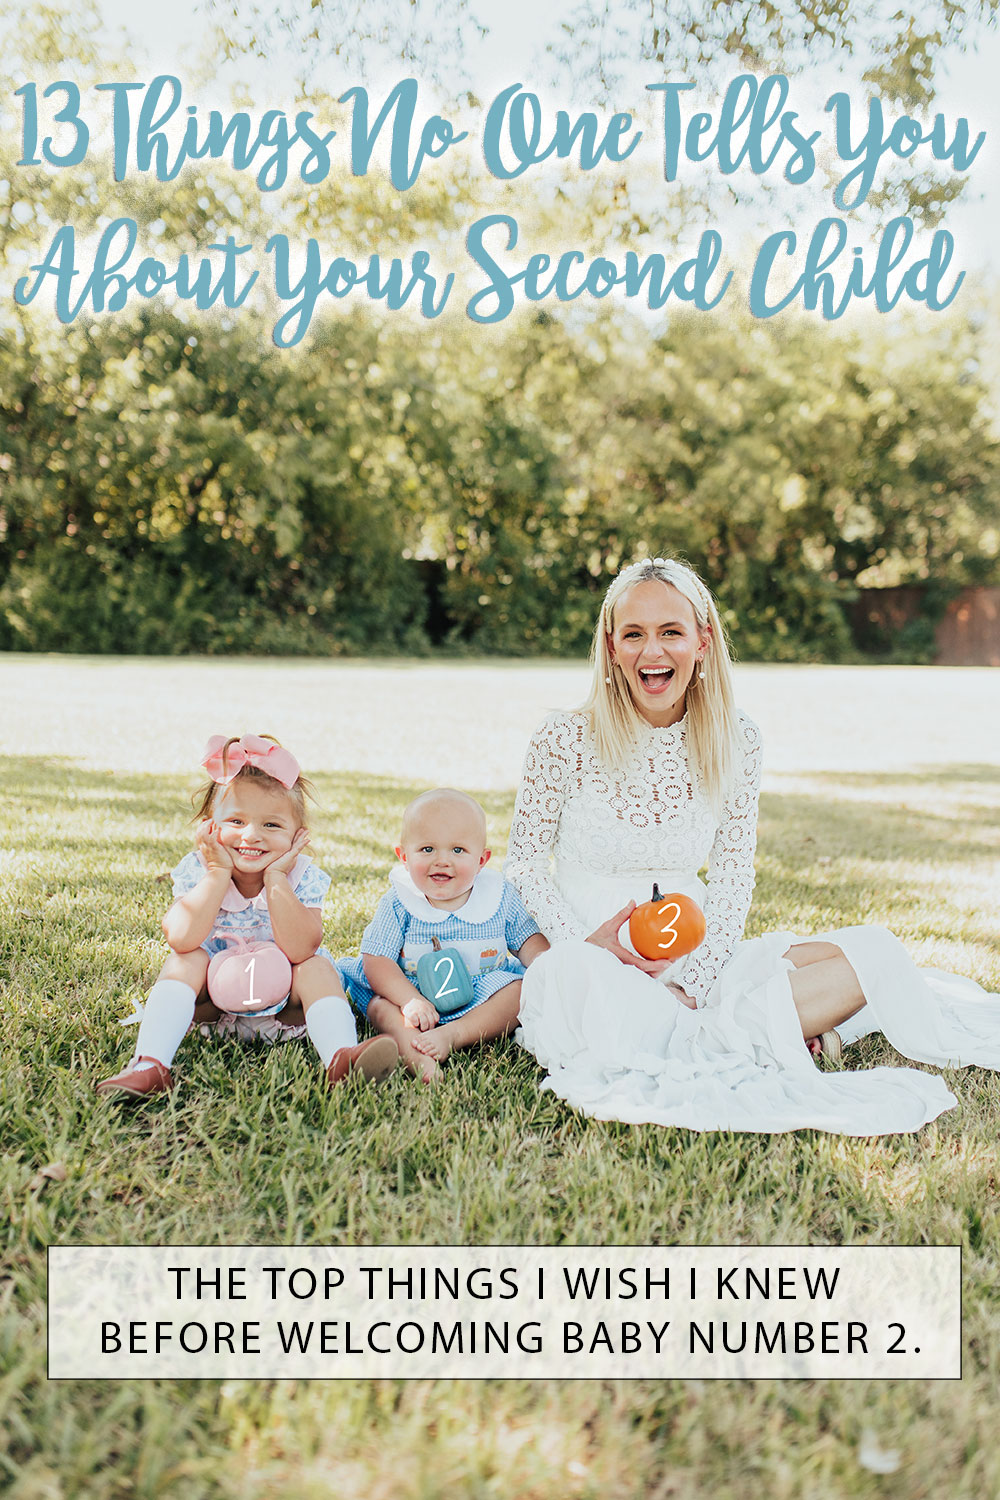 13 things no one tells you about your second child - should i have another baby?